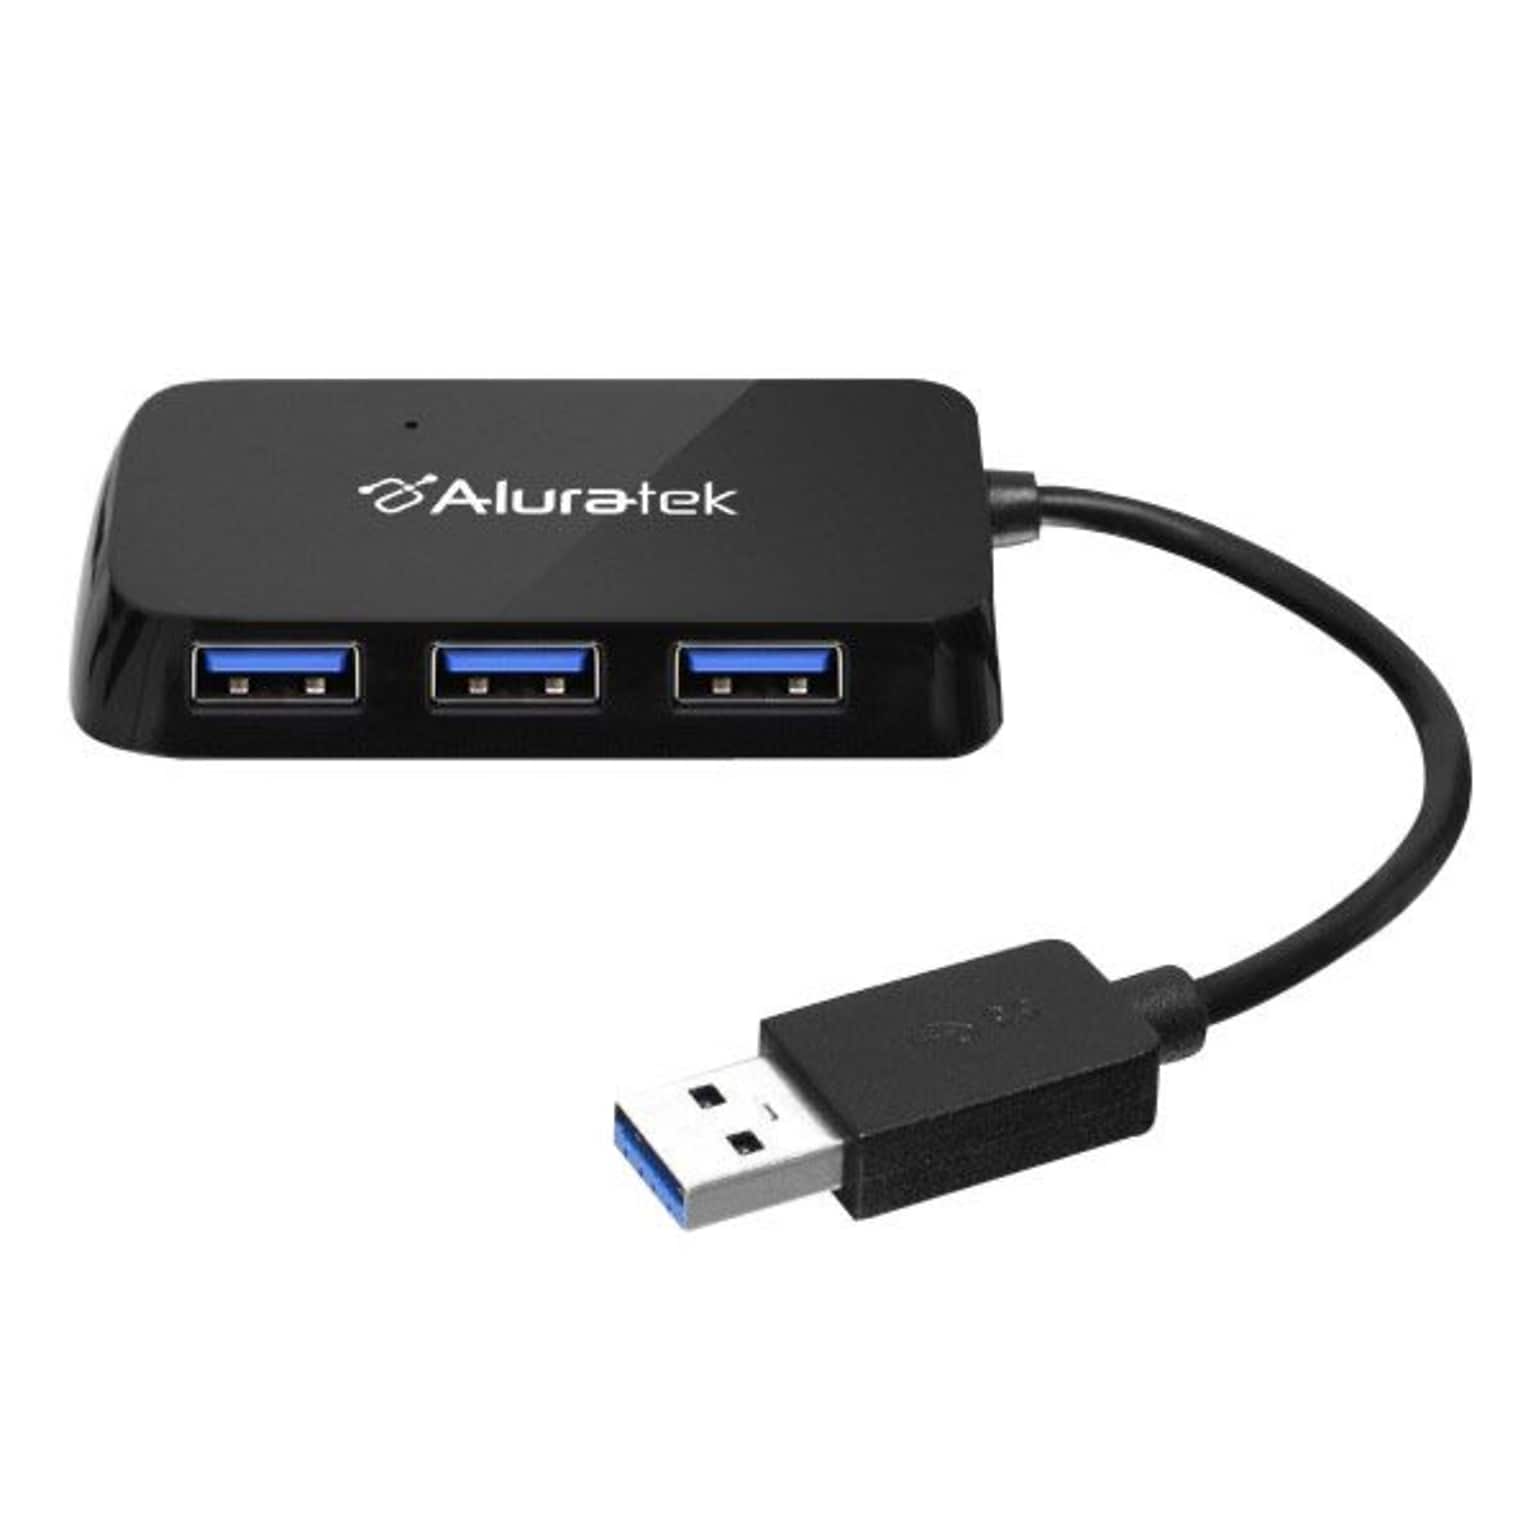 Aluratek 4 Port USB 3.0 SuperSpeed Hub With Attached Cable